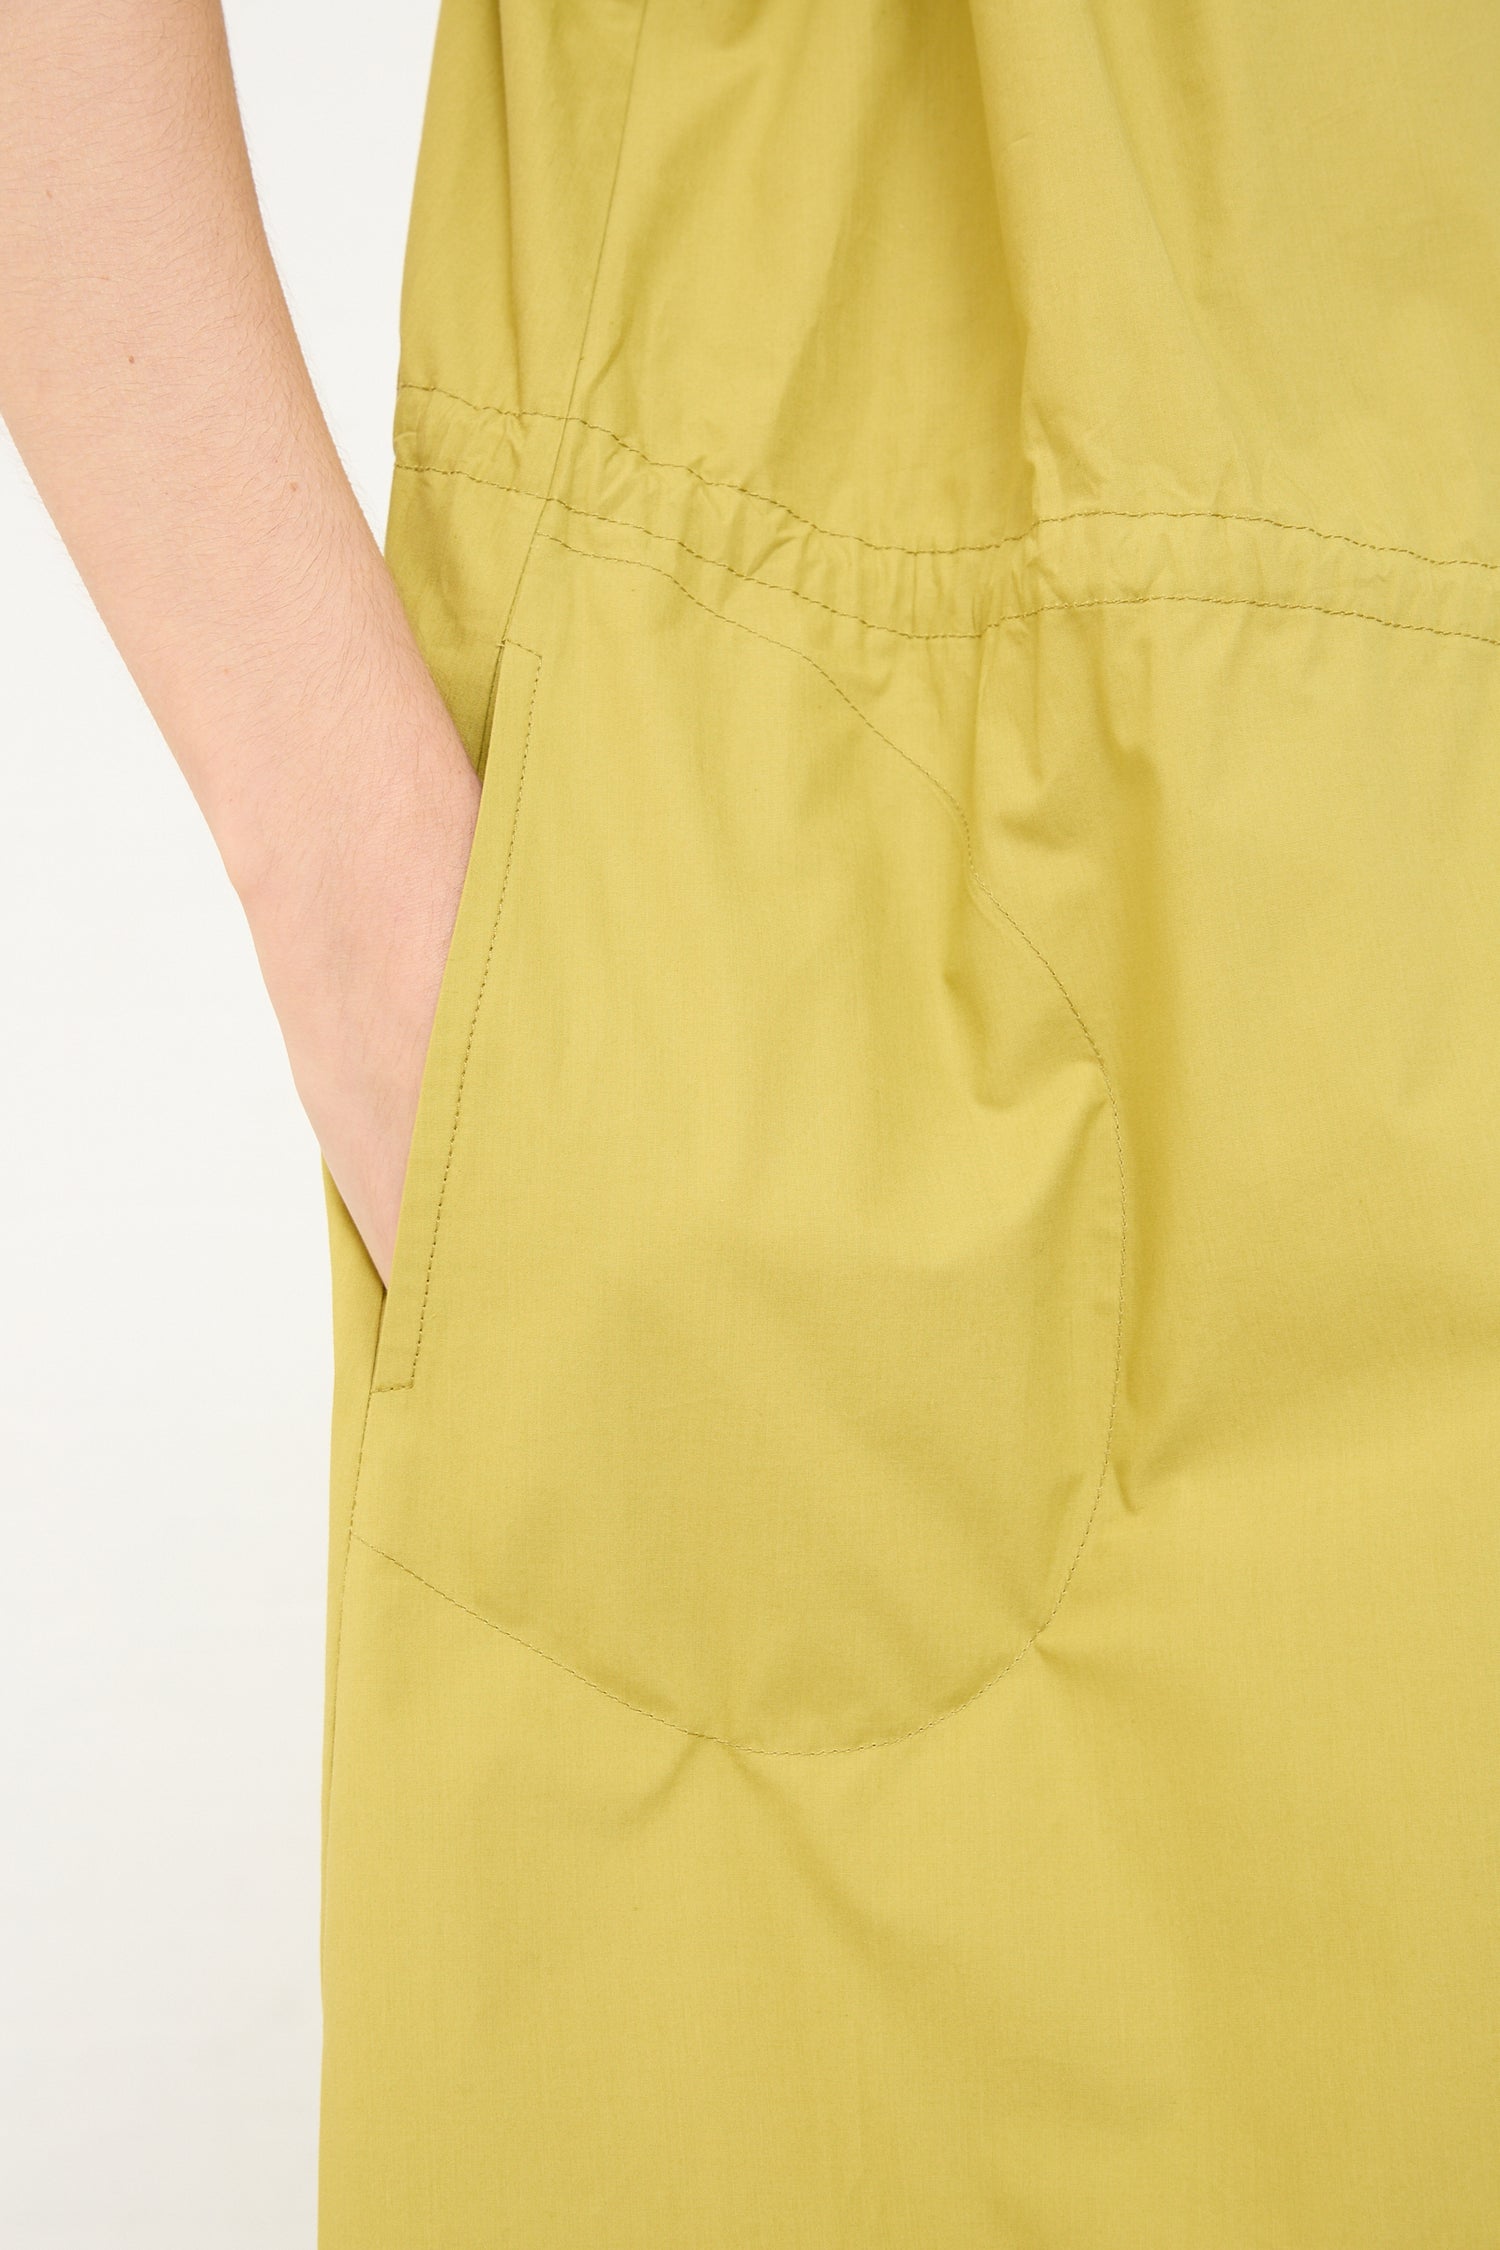 A woman wearing an oversized yellow Veronique Leroy Cotton Poplin Gathered Dress in Matcha with pockets. Up close view.